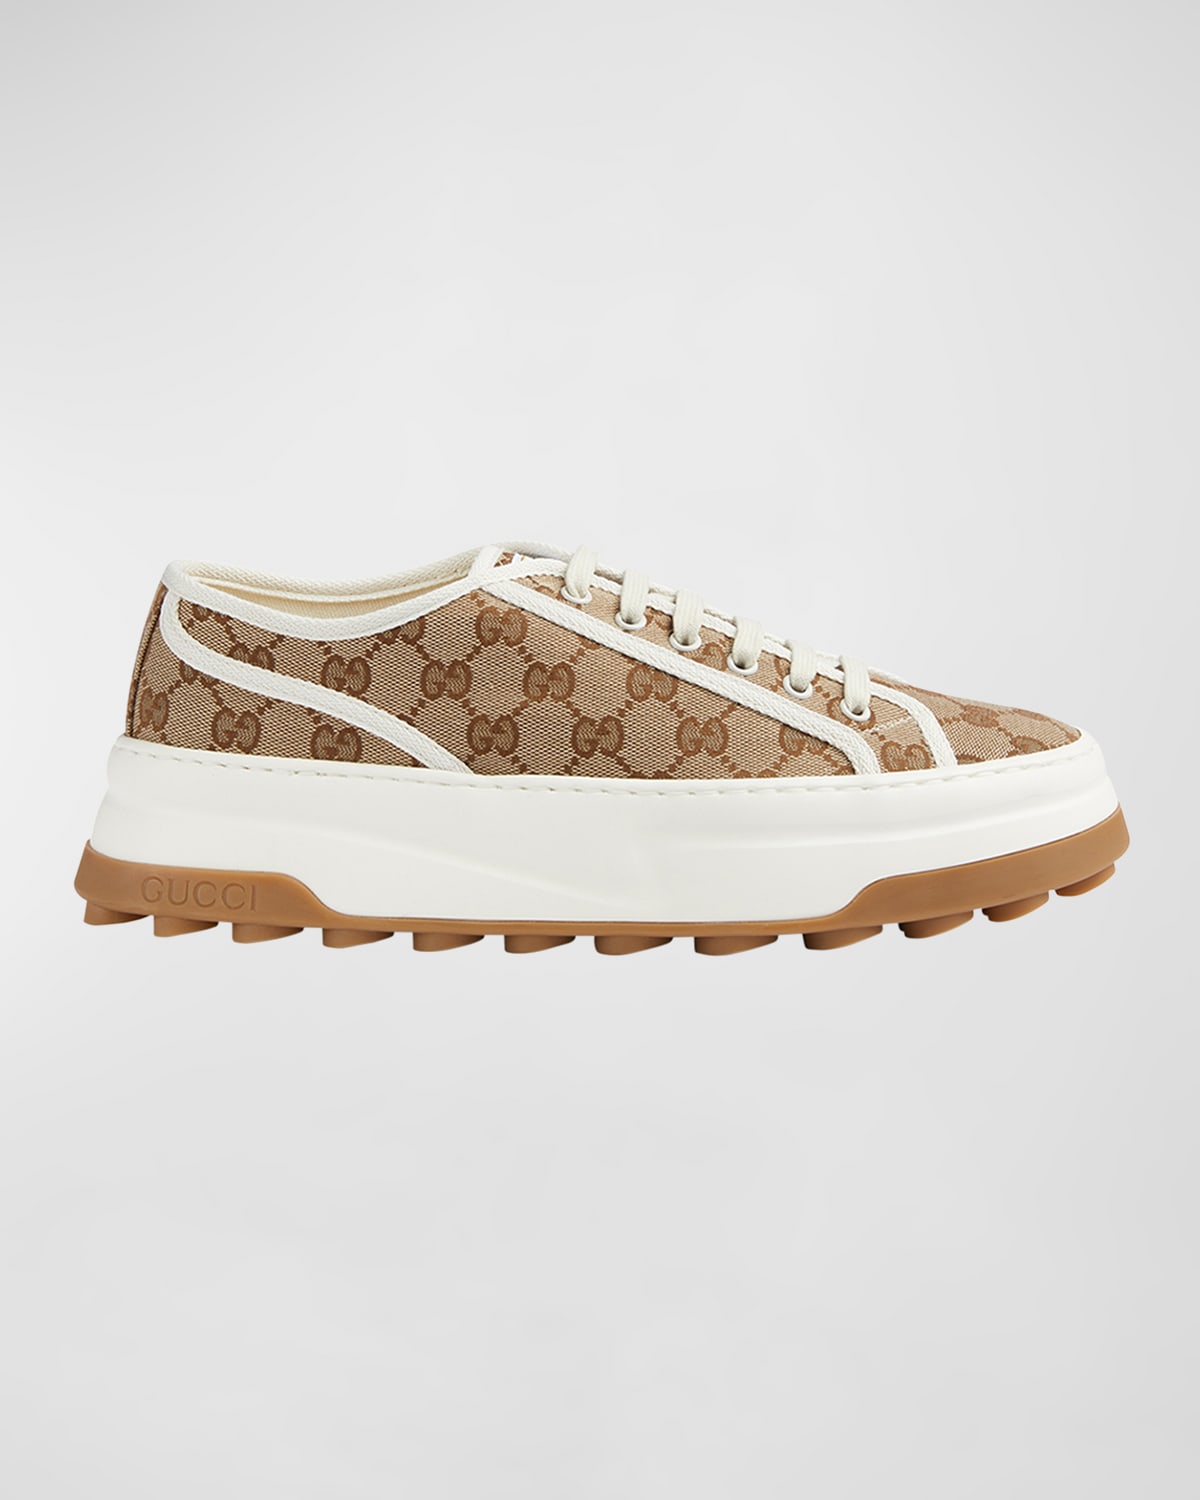 Gucci Men's Tennis Treck Gg Canvas Low-top Sneakers In Beige/white